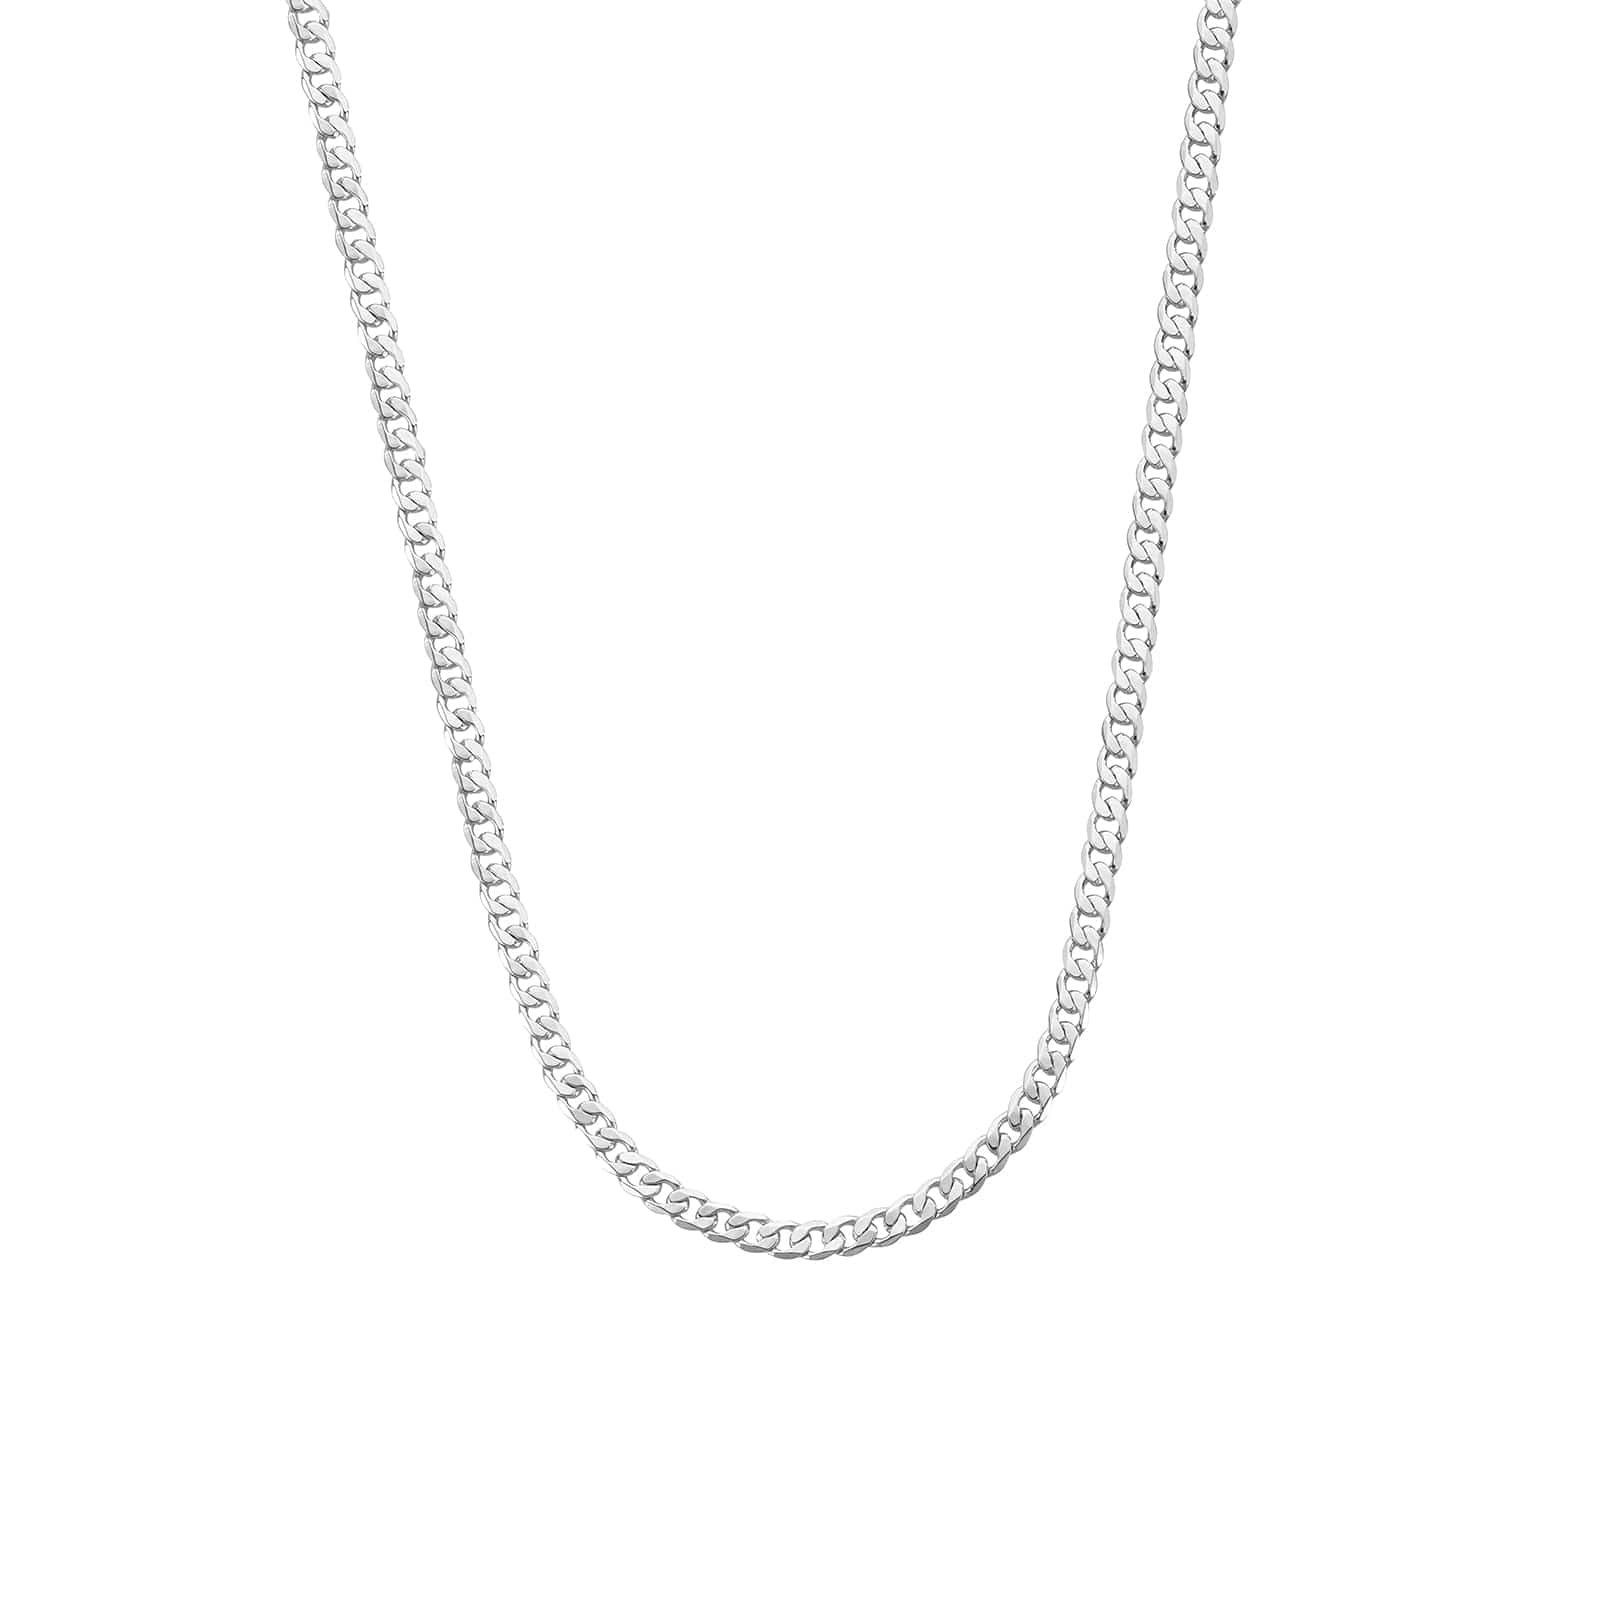 Gold Dipped Chains Curb Chain 4mm - White Gold